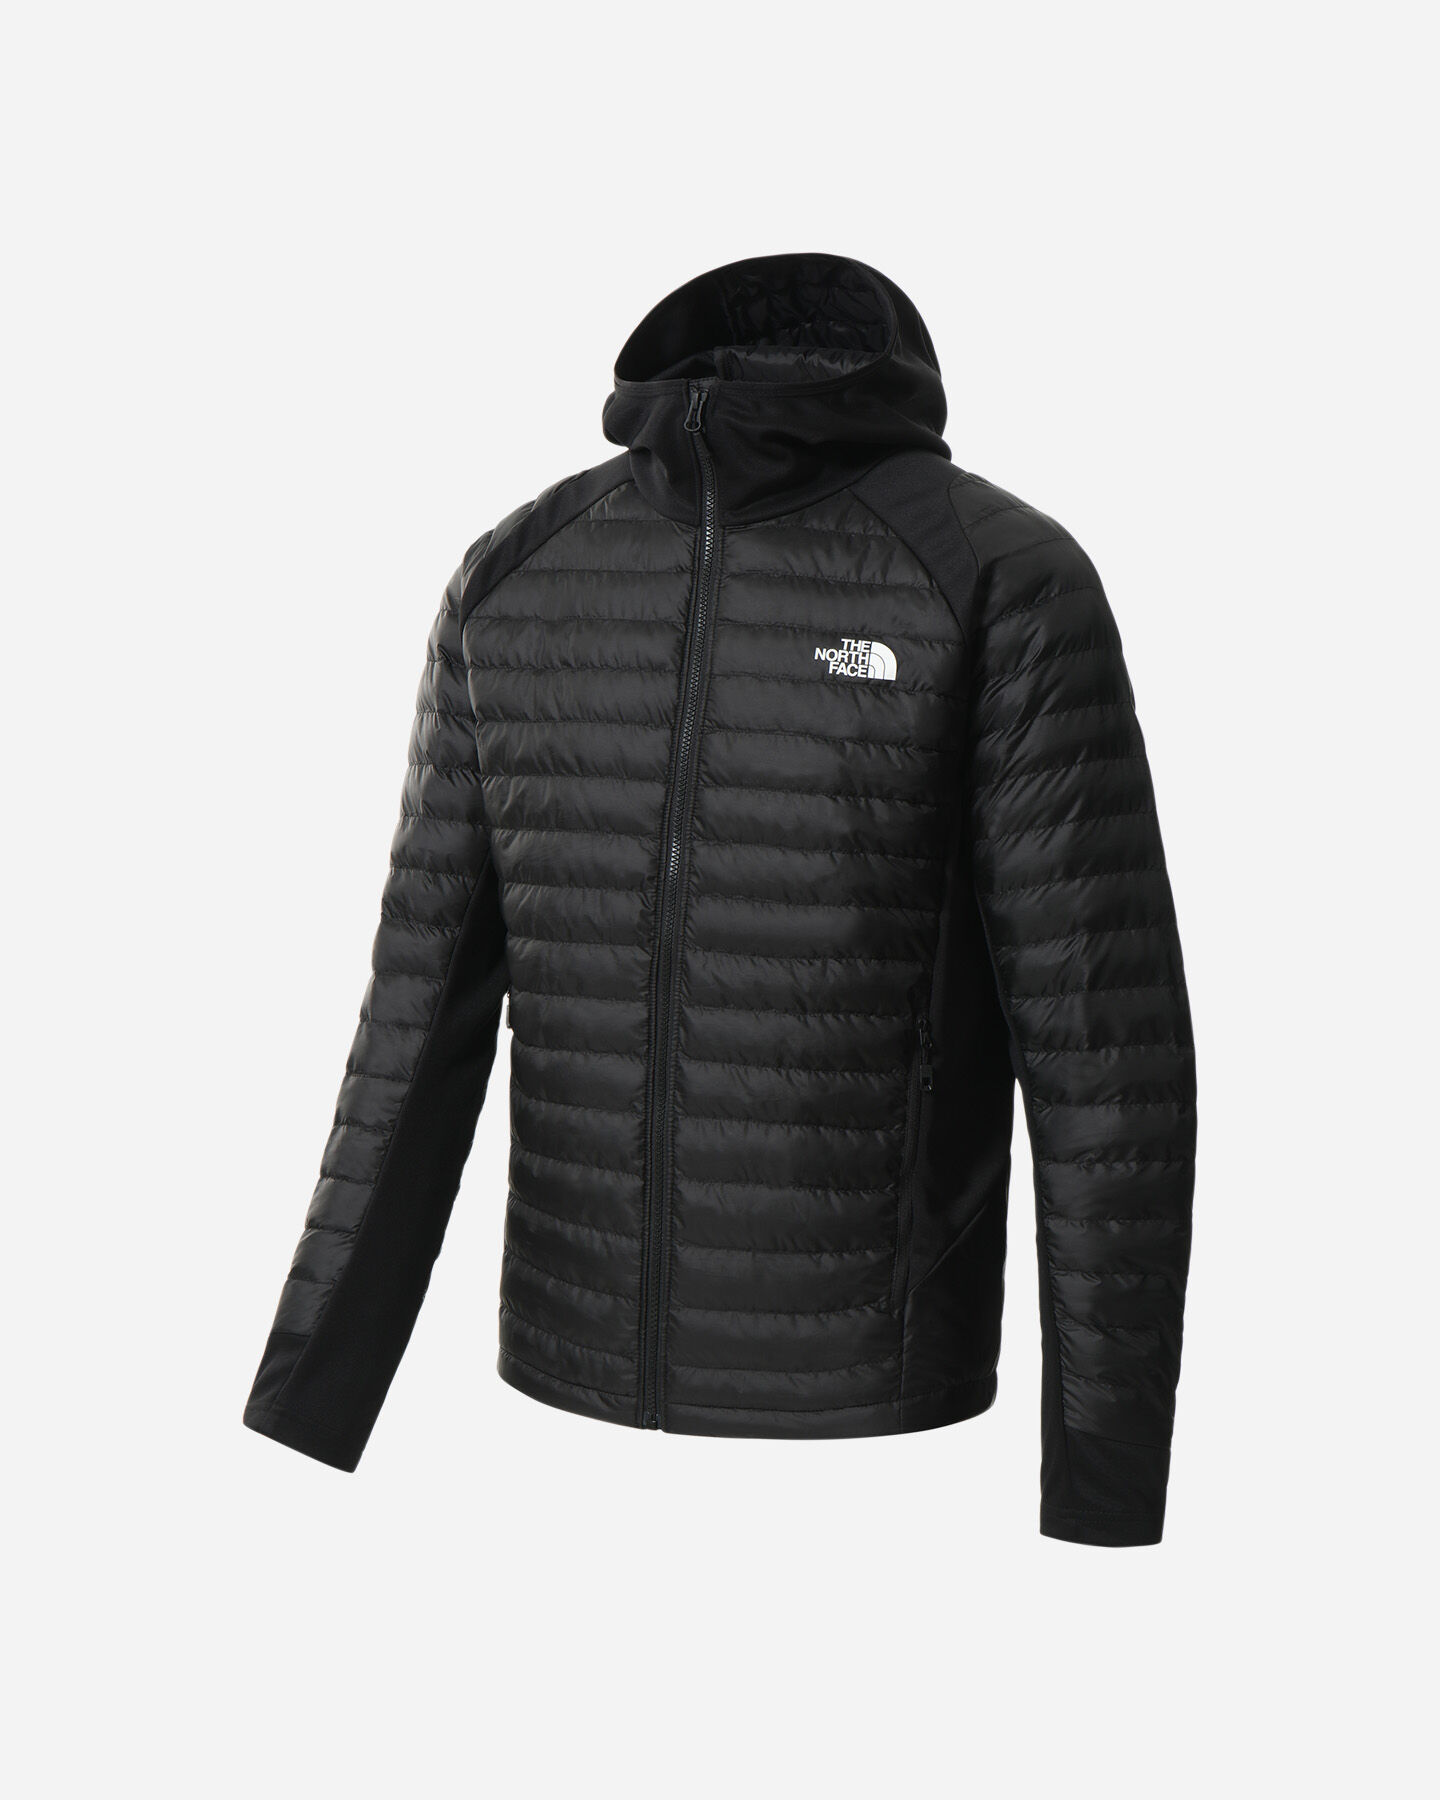  Pile THE NORTH FACE ATHLETIC OUTDOOR HYBRID M S5423231|B9K|XS scatto 0